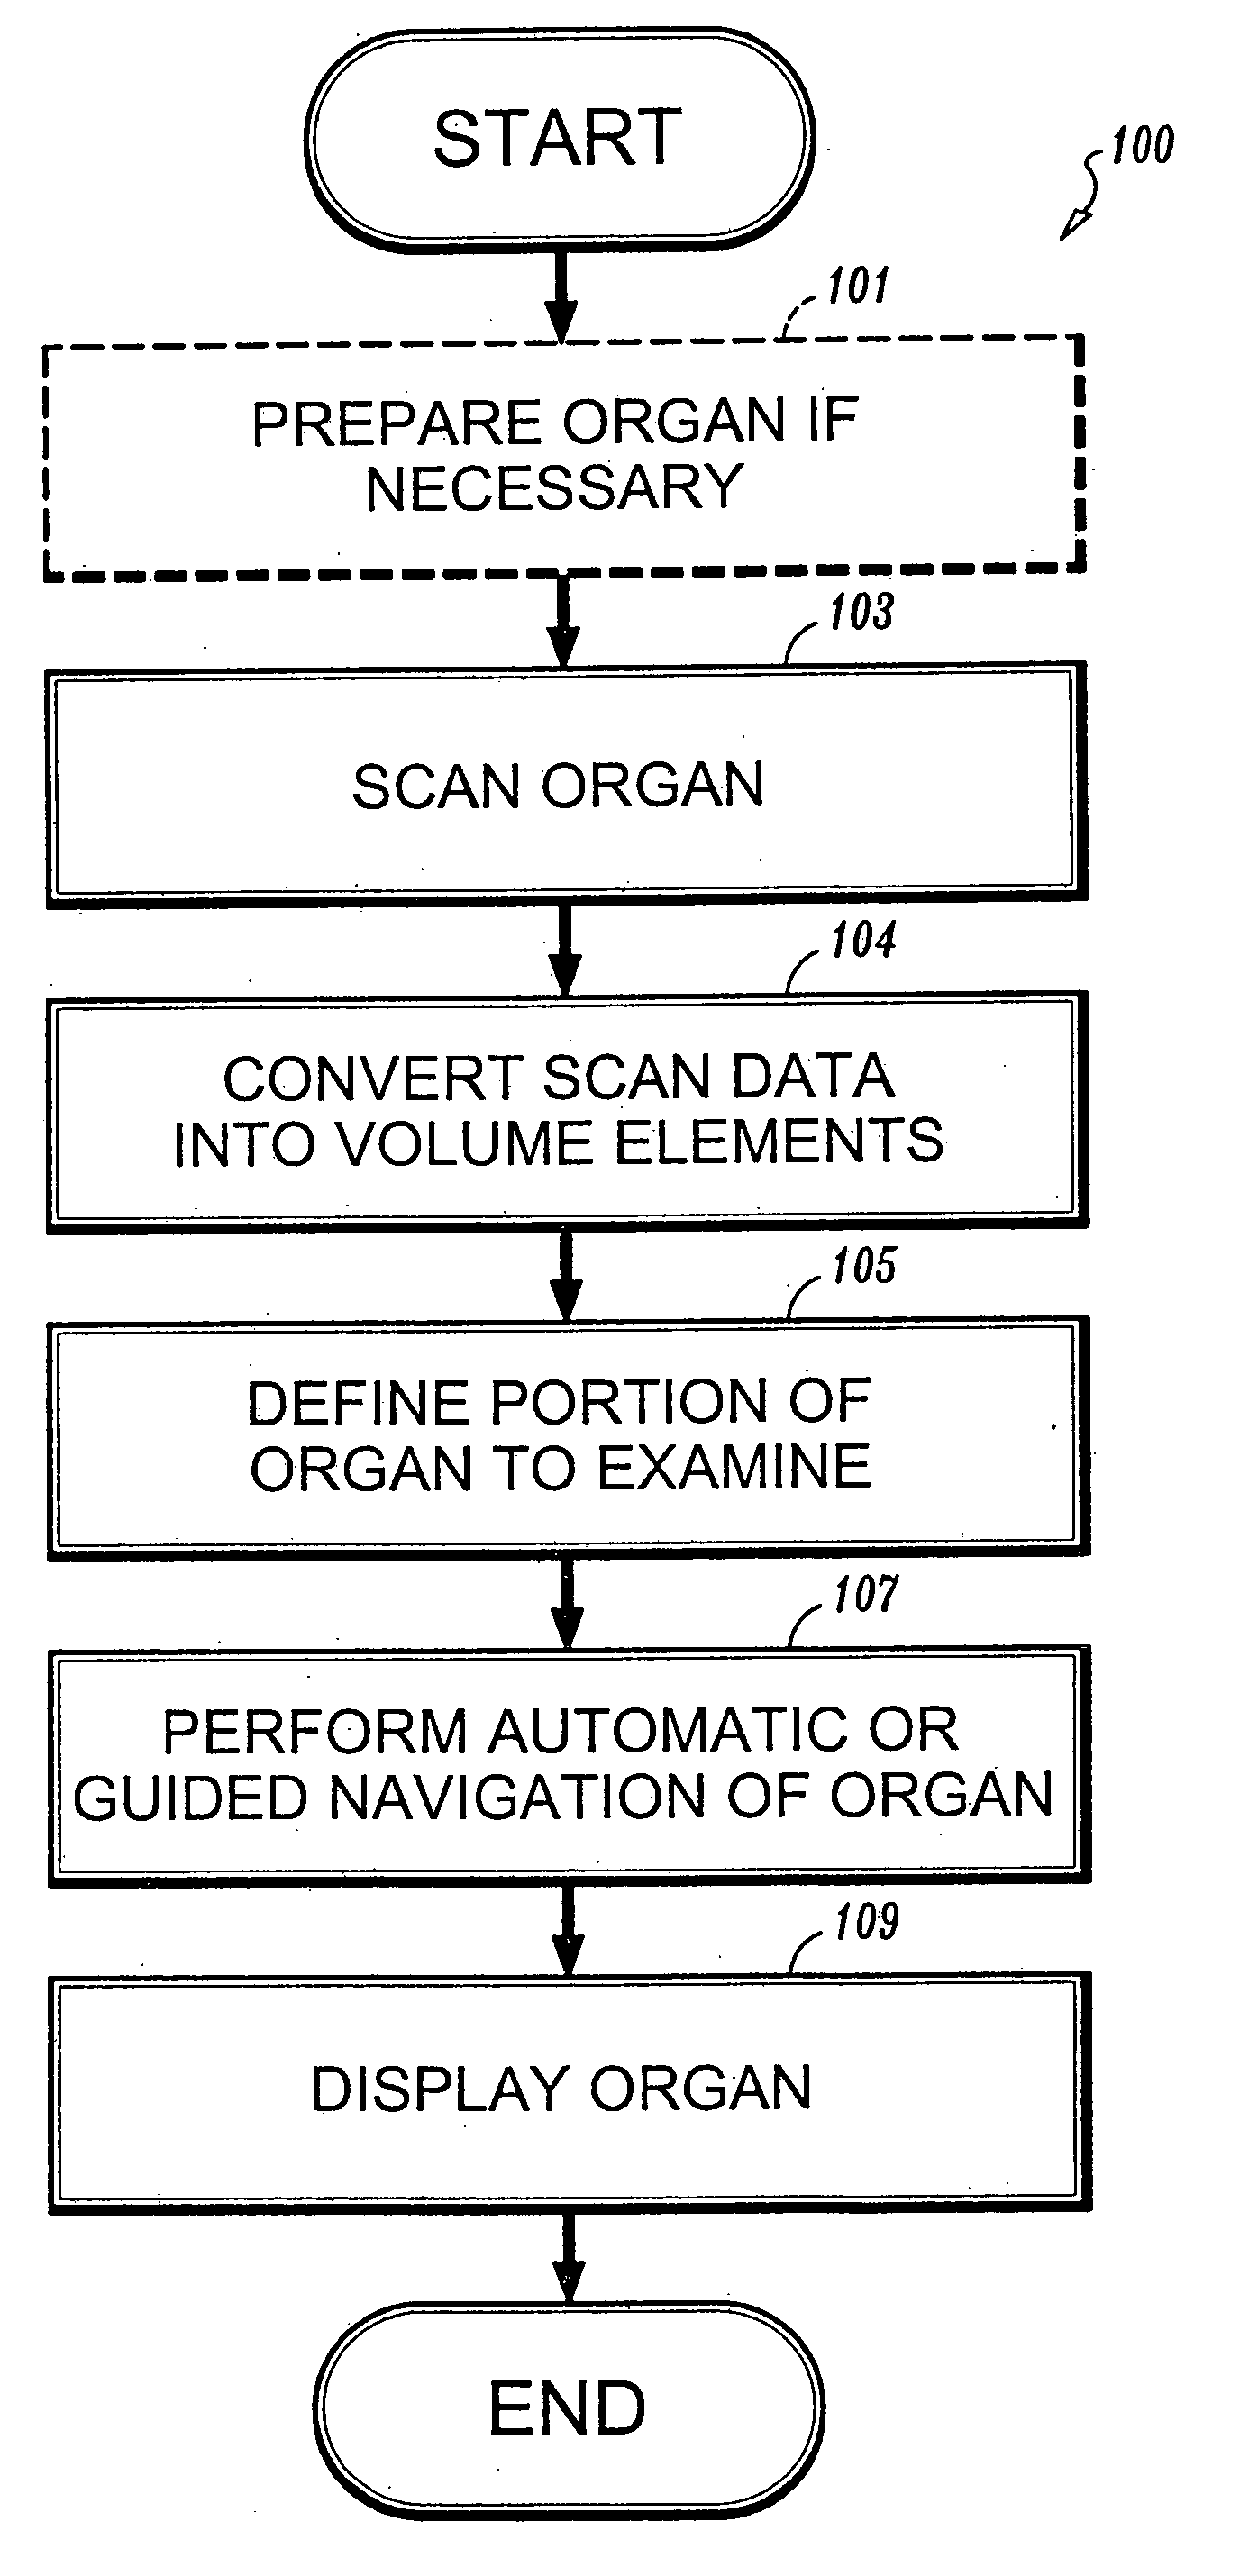 Registration of scanning data acquired from different patient positions